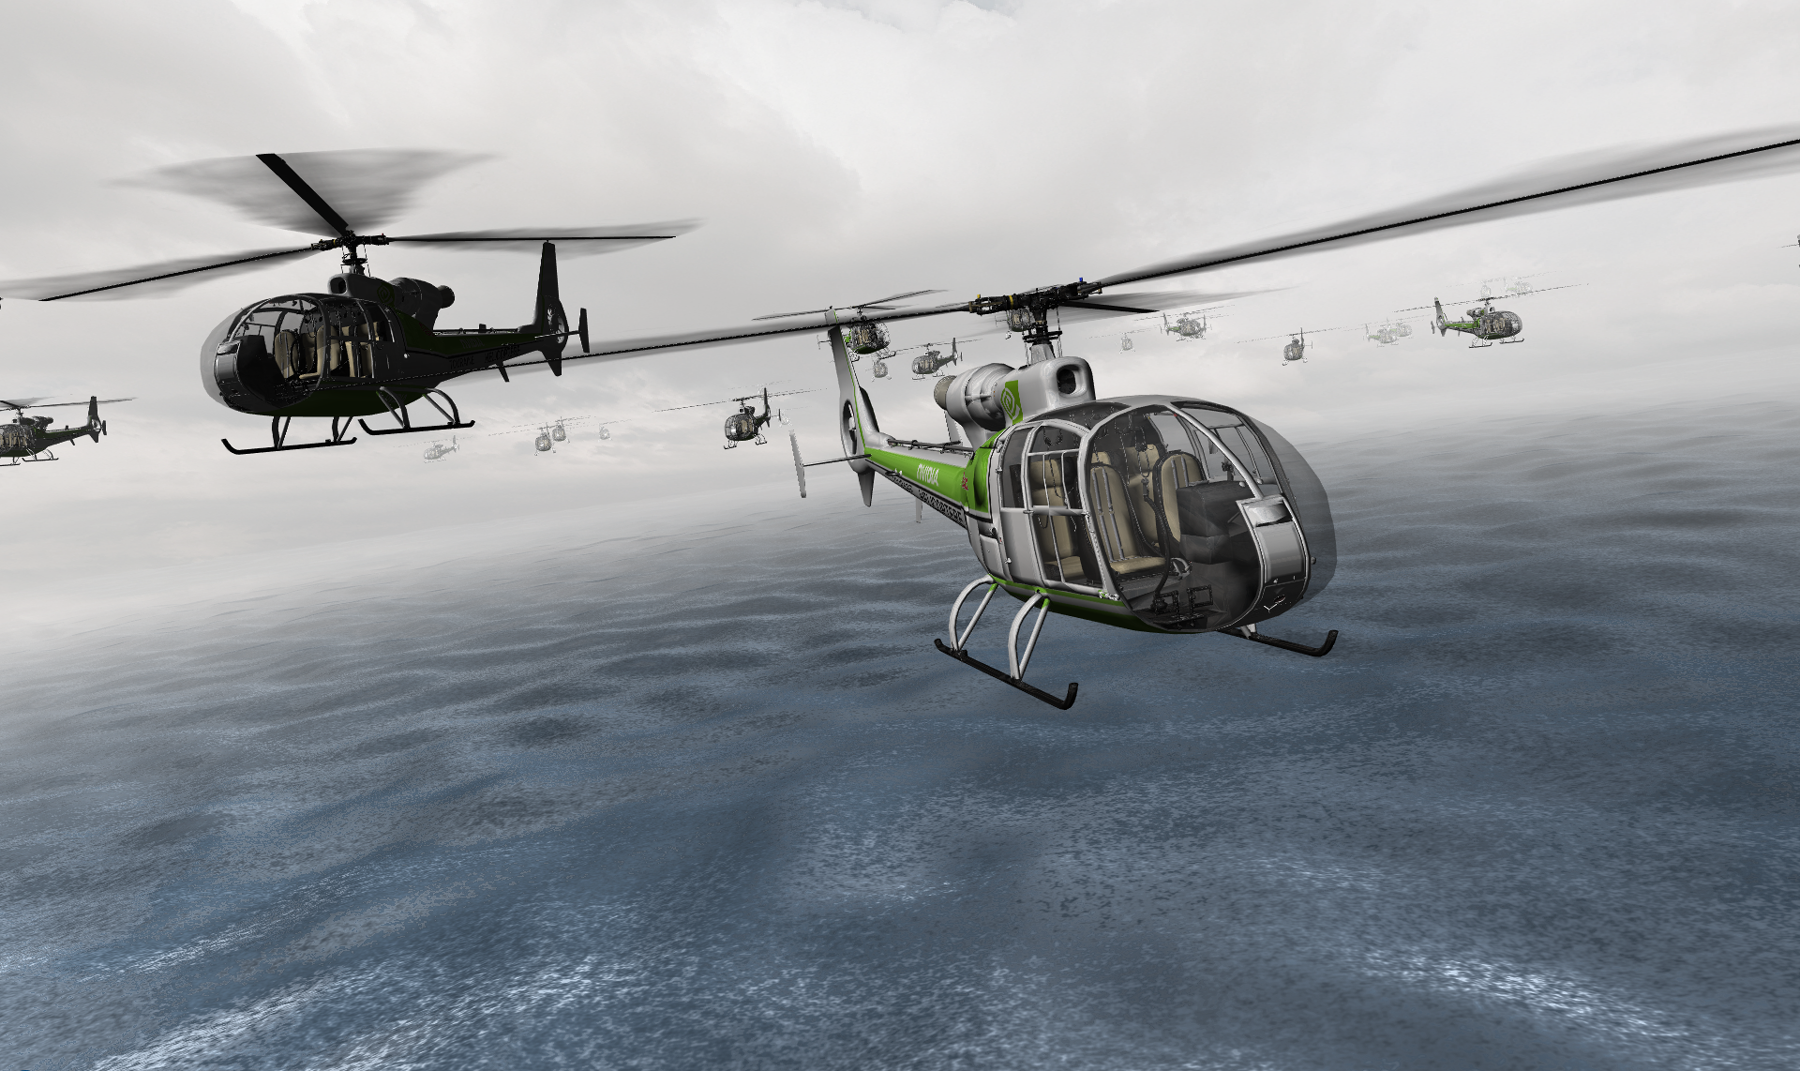 Sample screenshot: Helicopters fly through the sky above an ocean.